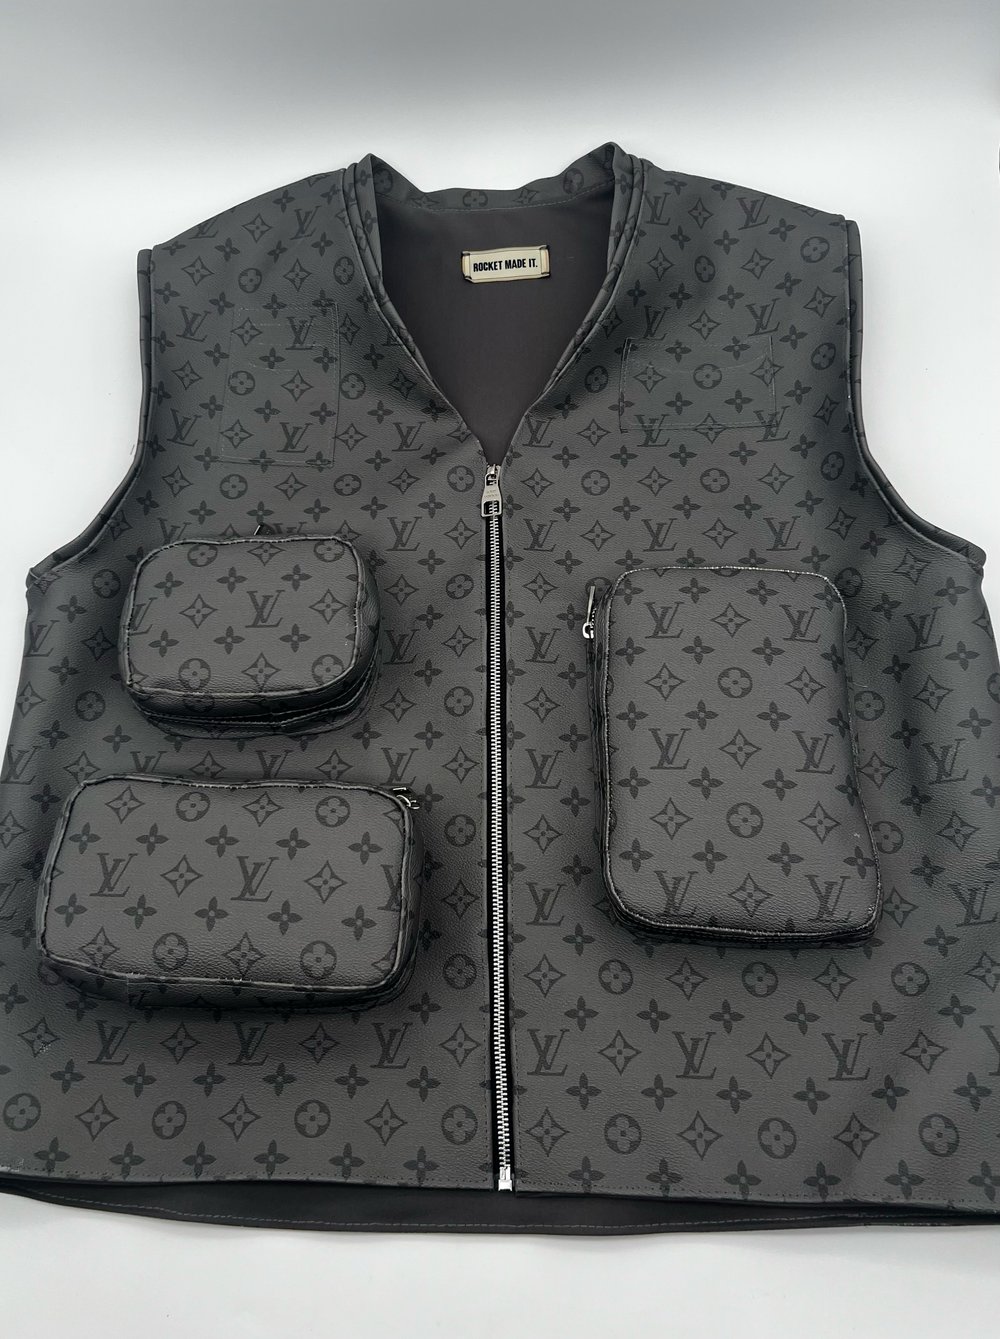 Custom one of one MCM vest available to purchase, custom LV Vest